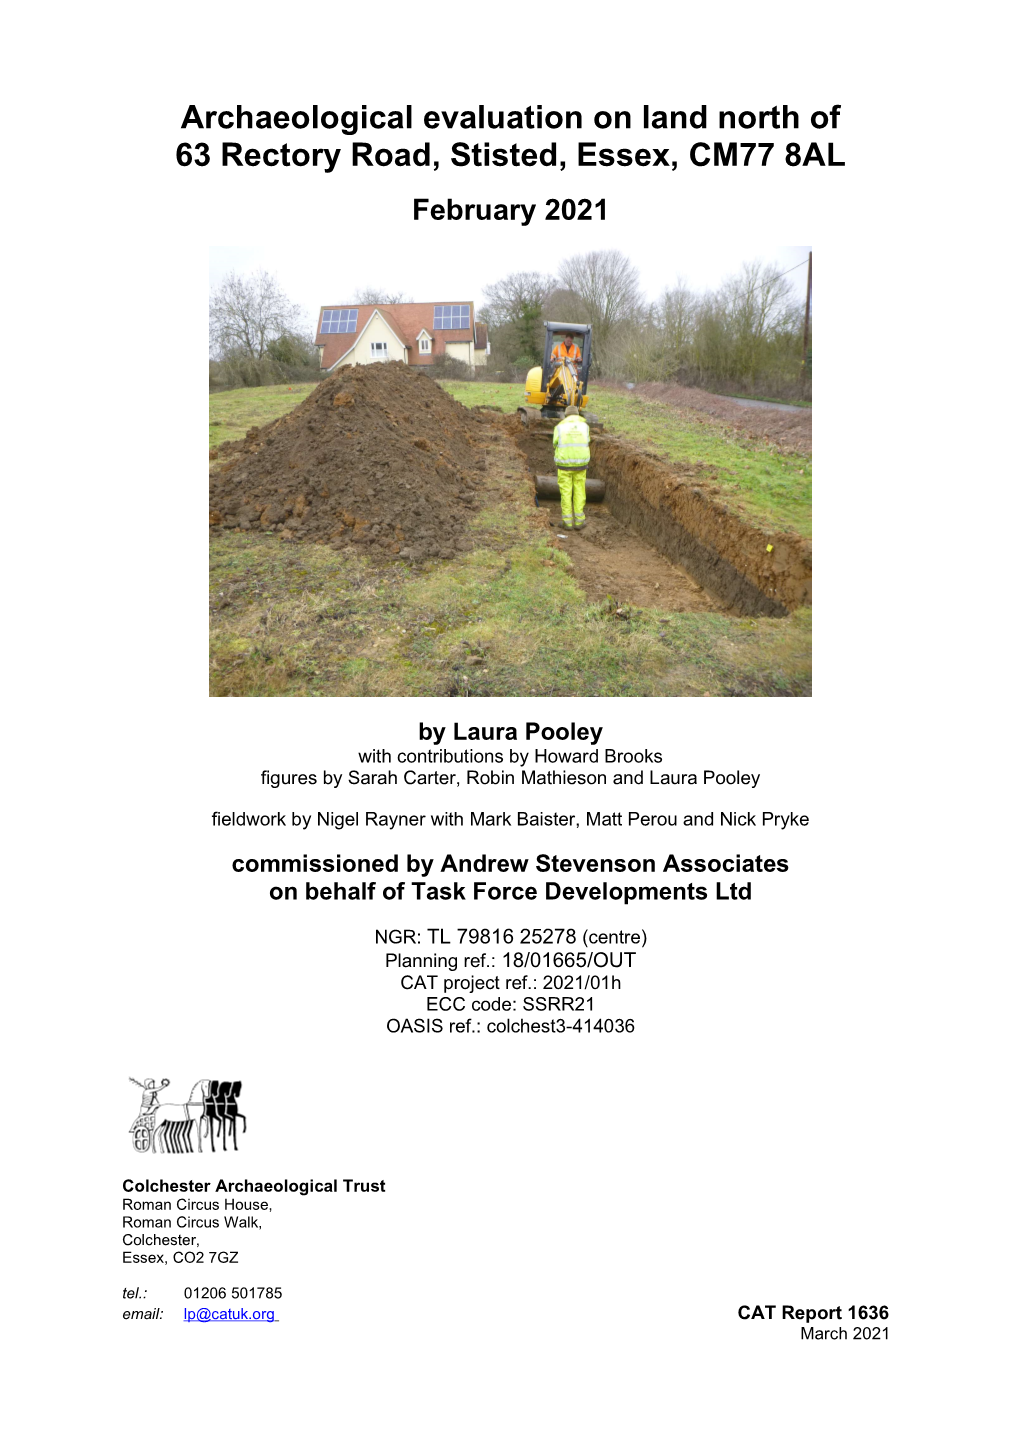 Archaeological Evaluation on Land North of 63 Rectory Road, Stisted, Essex, CM77 8AL February 2021